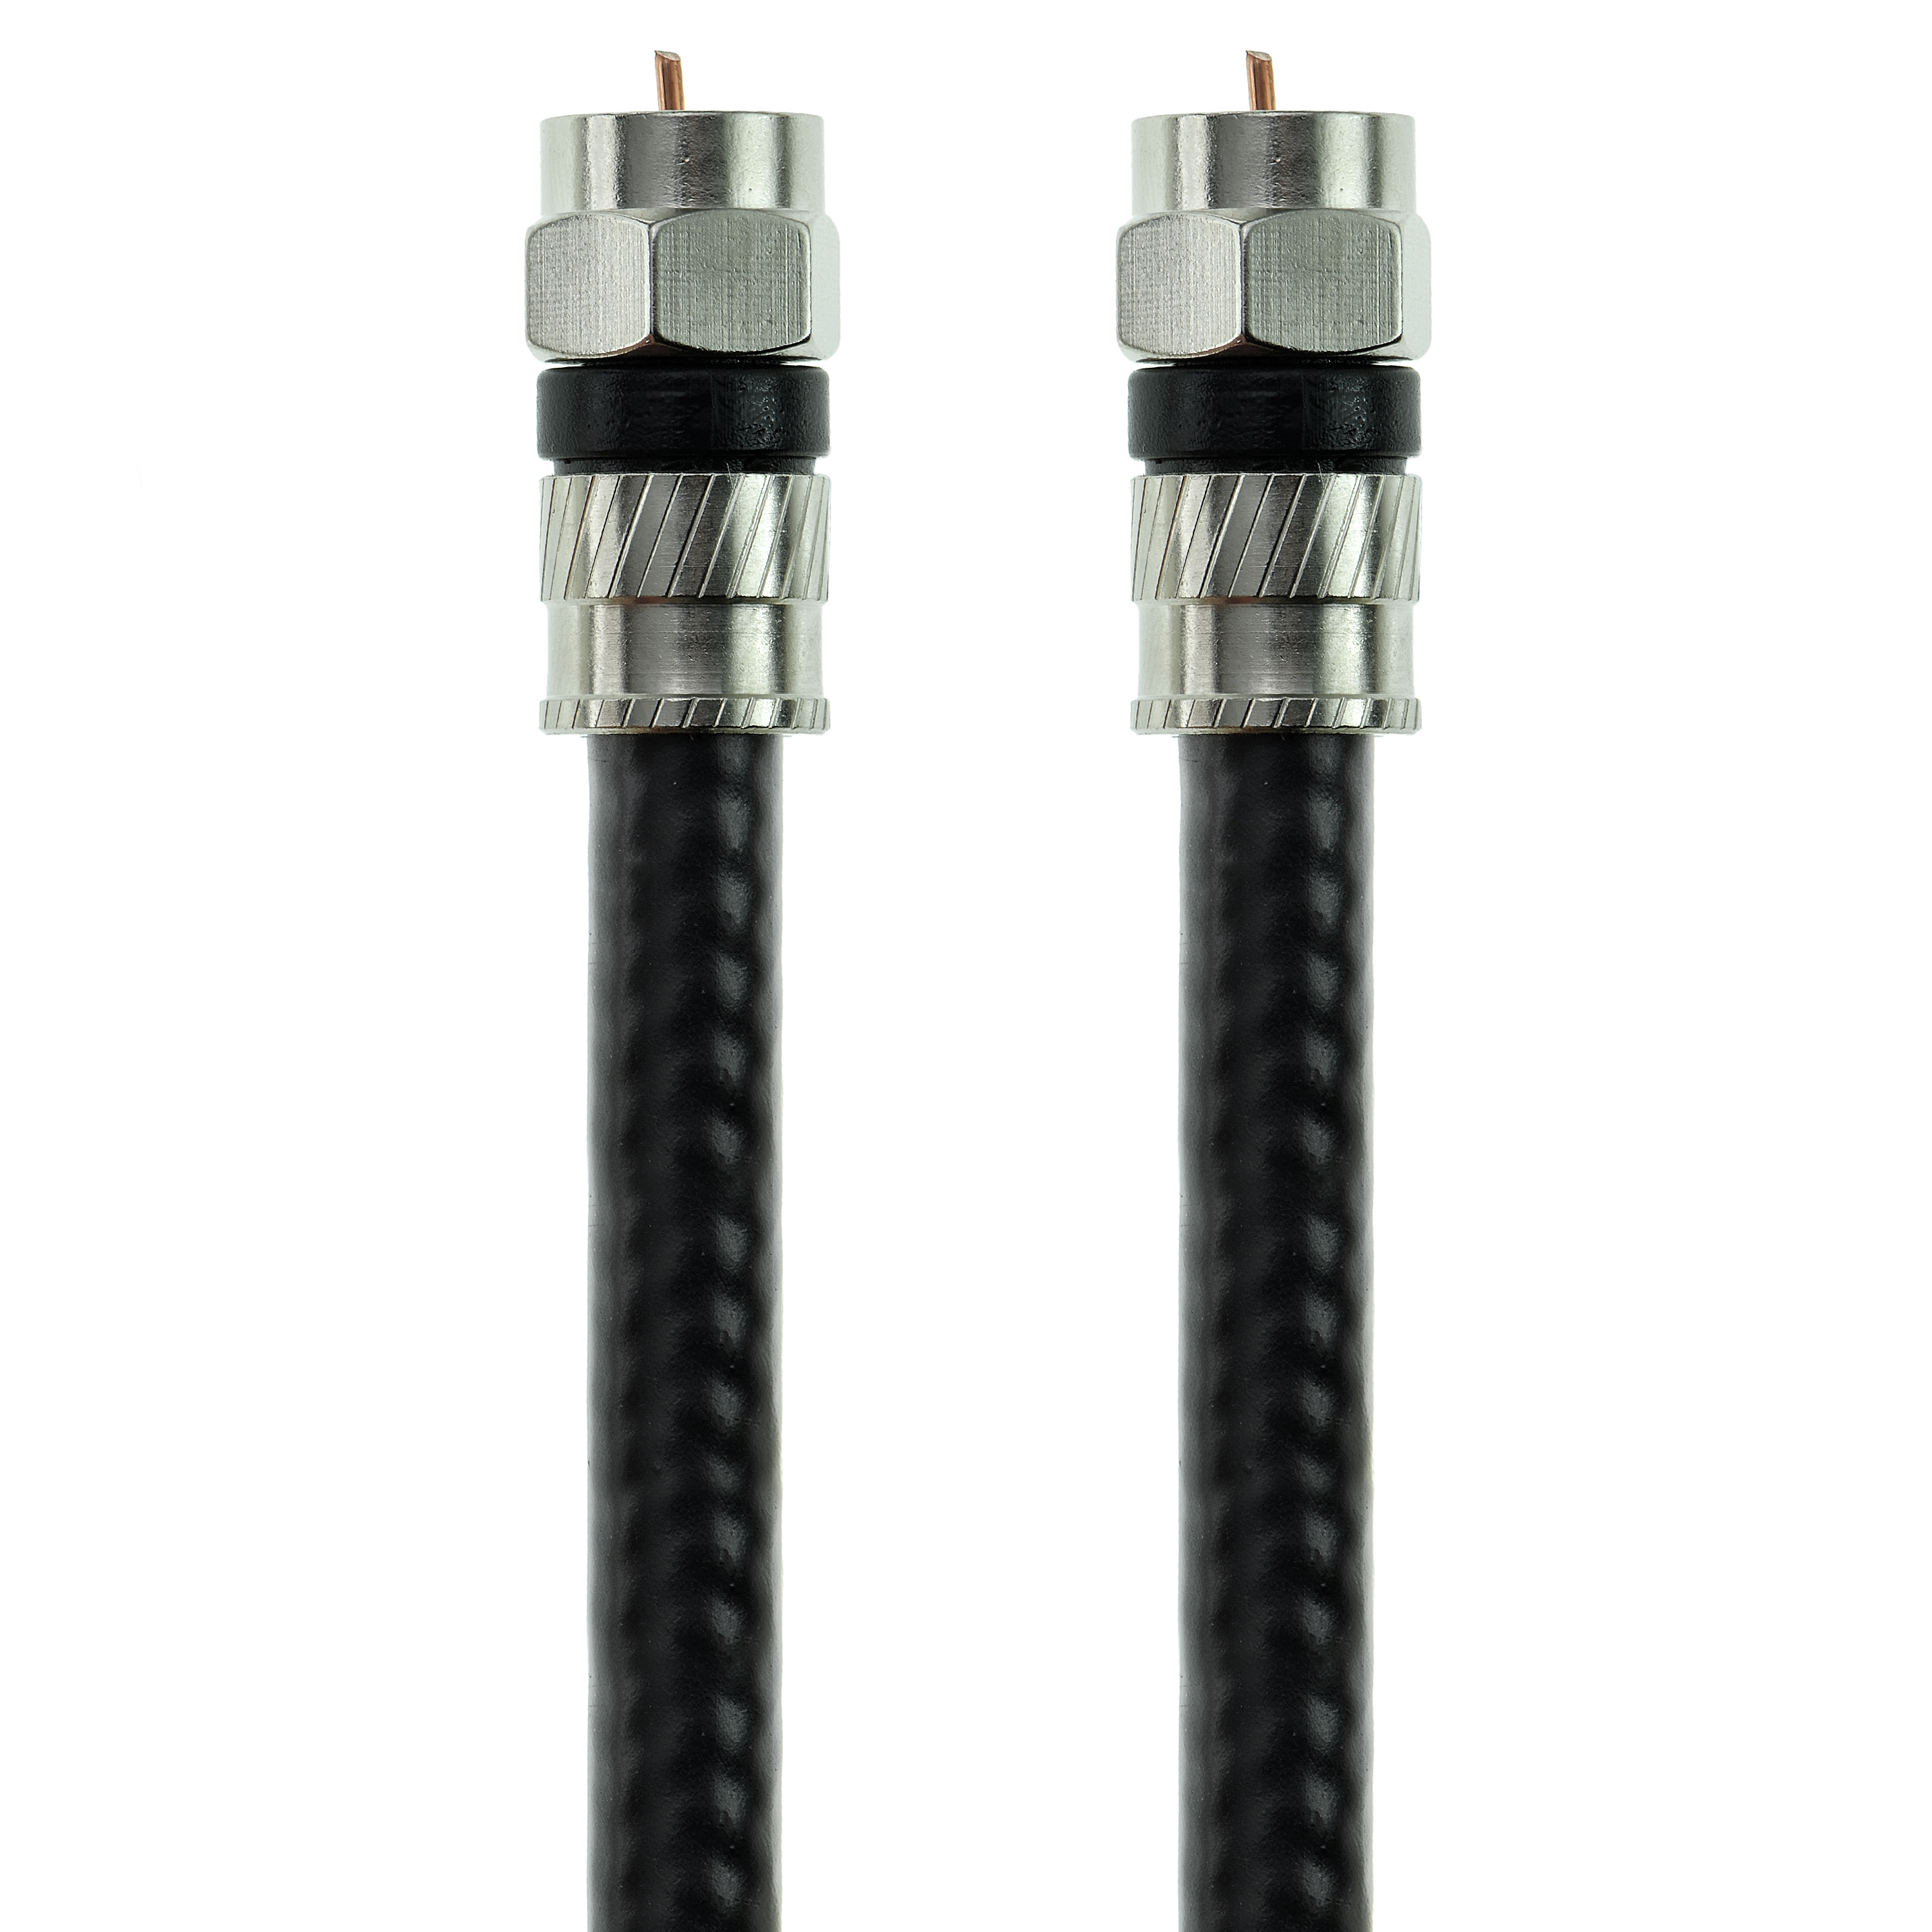 with F-Male Connectors CJ15-6BF-N1 Removable EZ Grip Caps Tri-Shield CL2 RG6 Mediabridge Coaxial Cable 15 Feet 